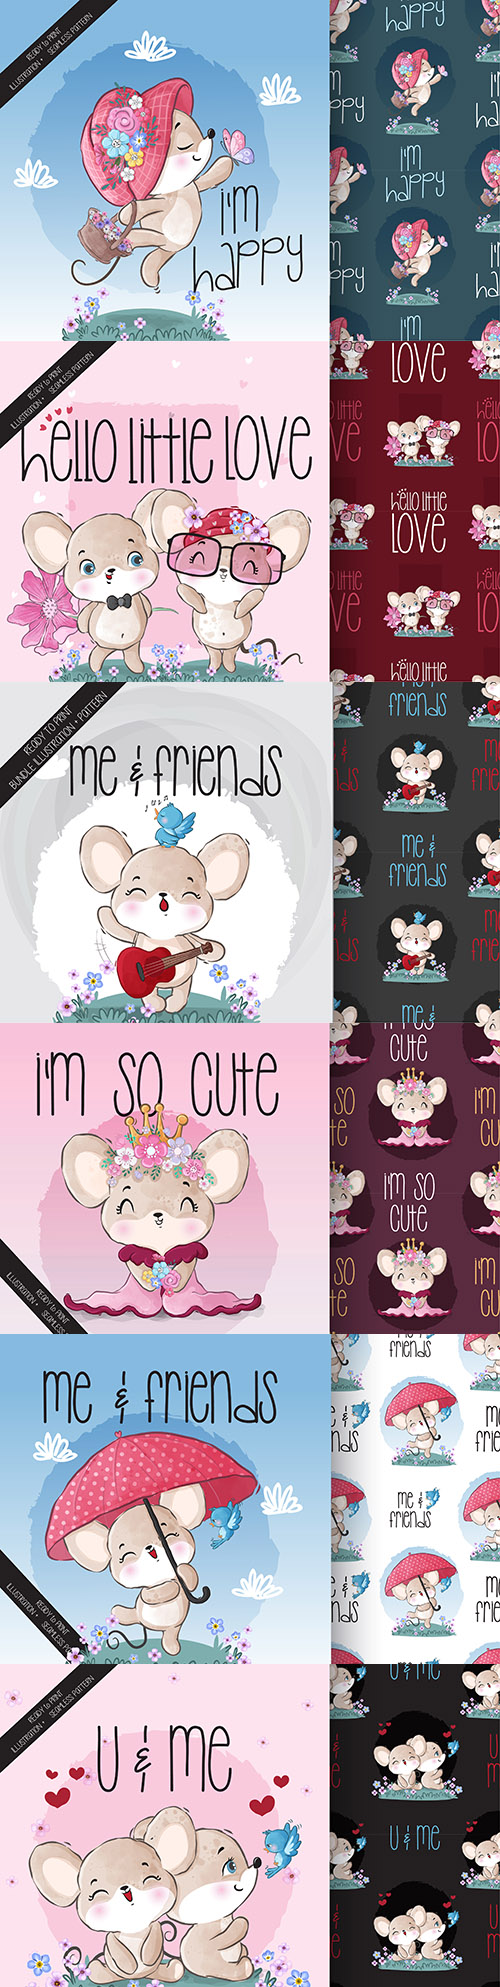 Cute mouse animals and seamless patterns
